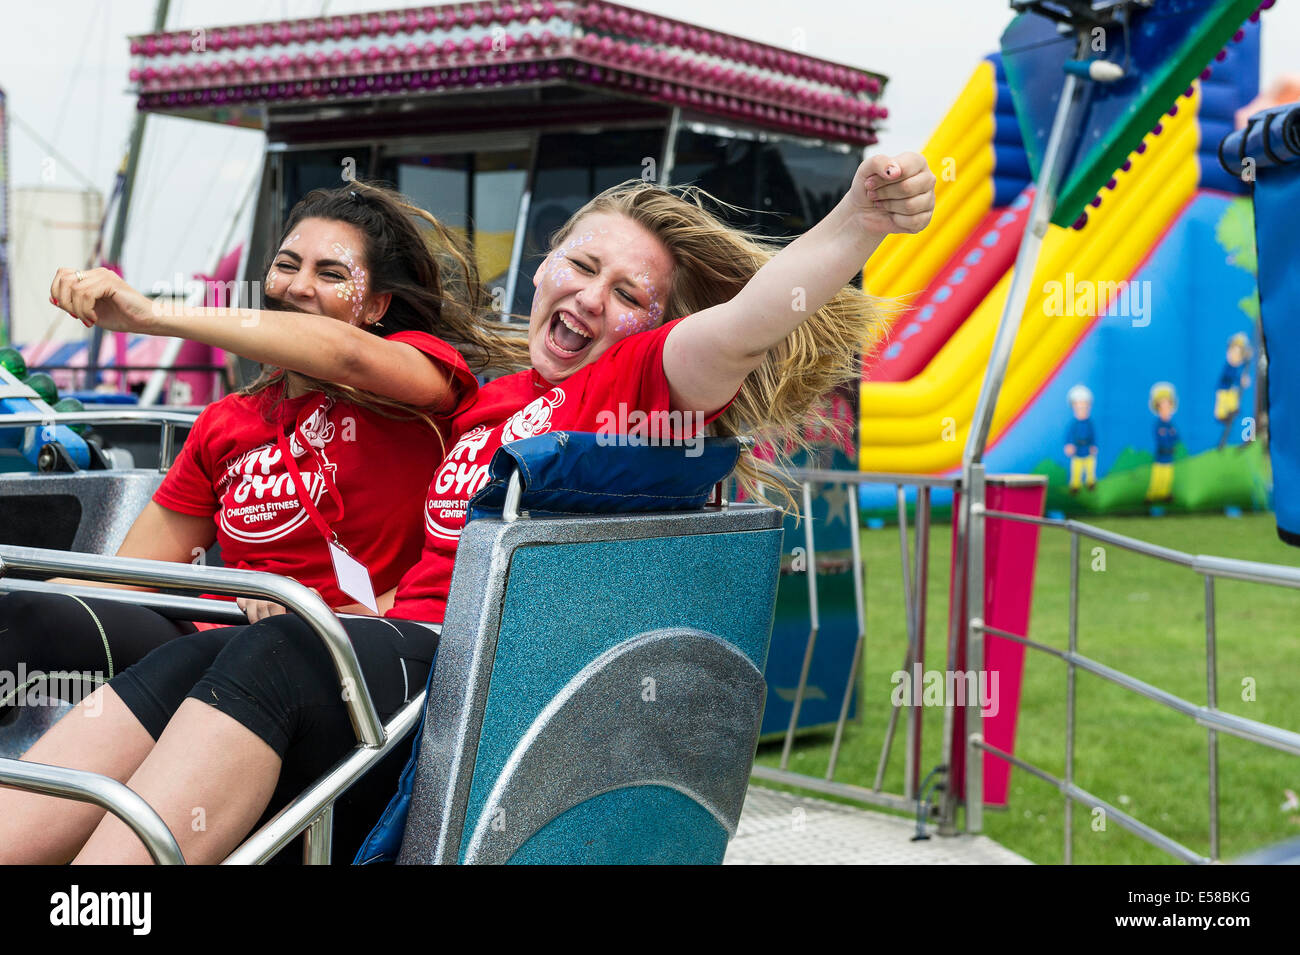 Two young girls enjoying themselves on a fairground ride at the Brentwood Festival in Essex. Stock Photo